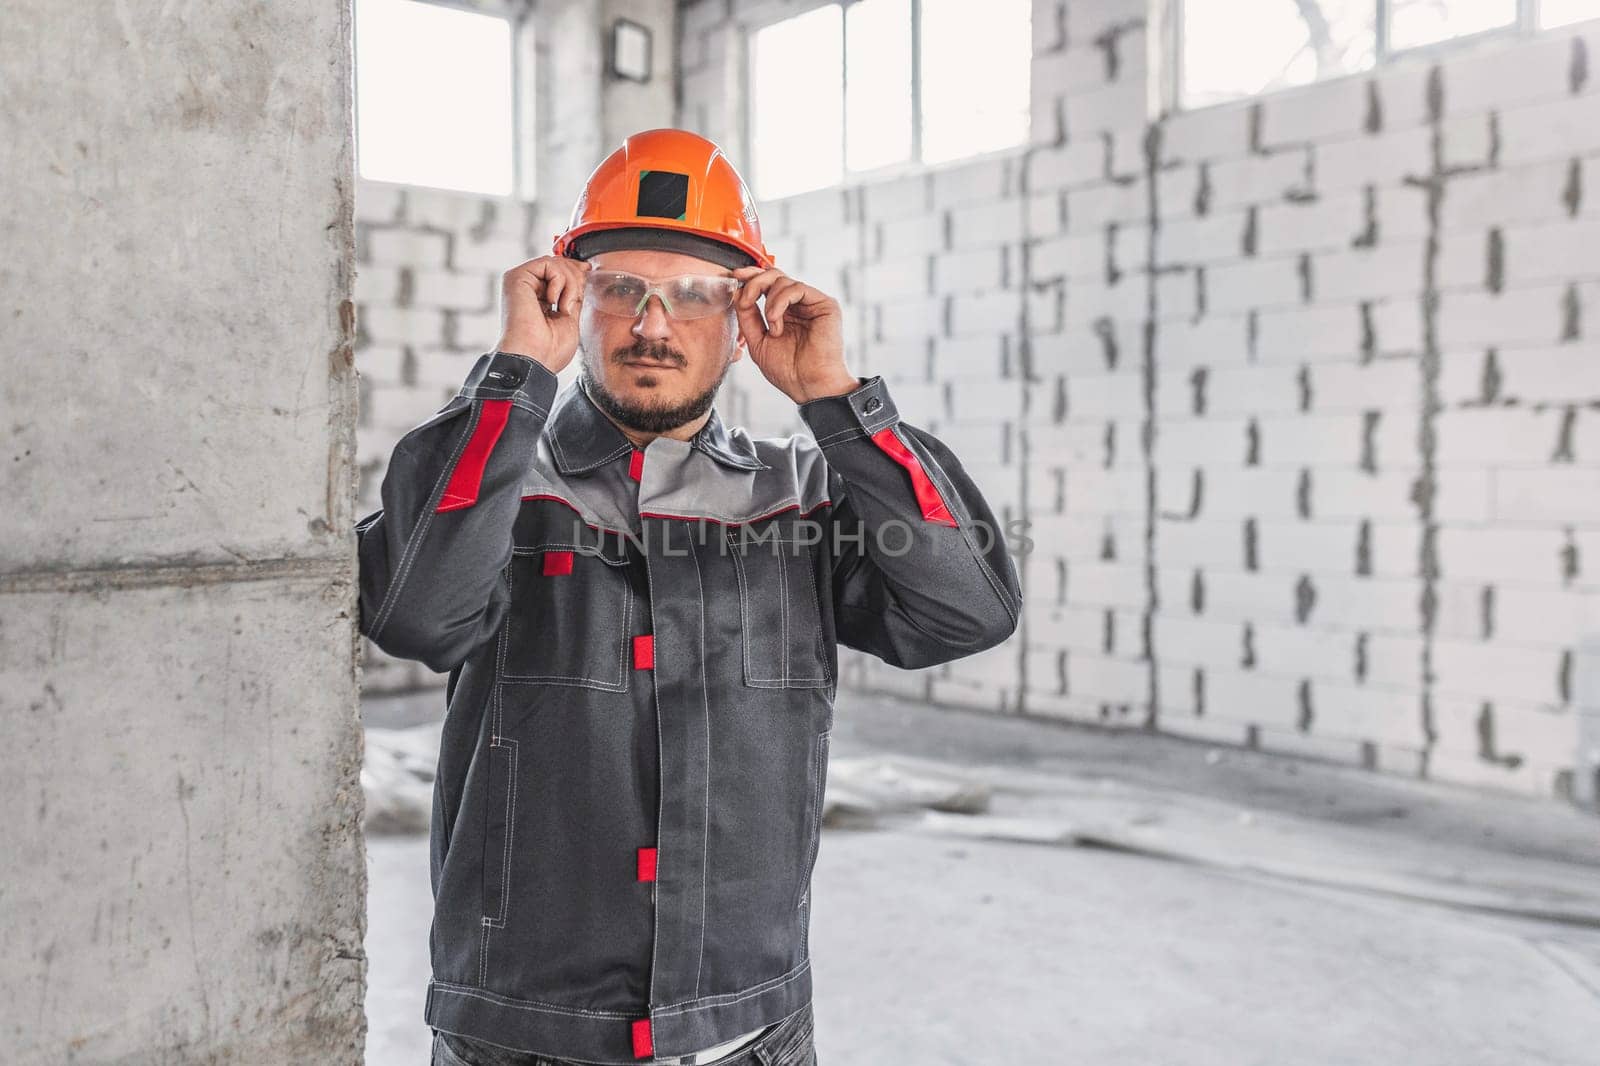 Construction worker in a hard hat and overalls adjusts his safety glasses at a construction site, workplace safety concept.